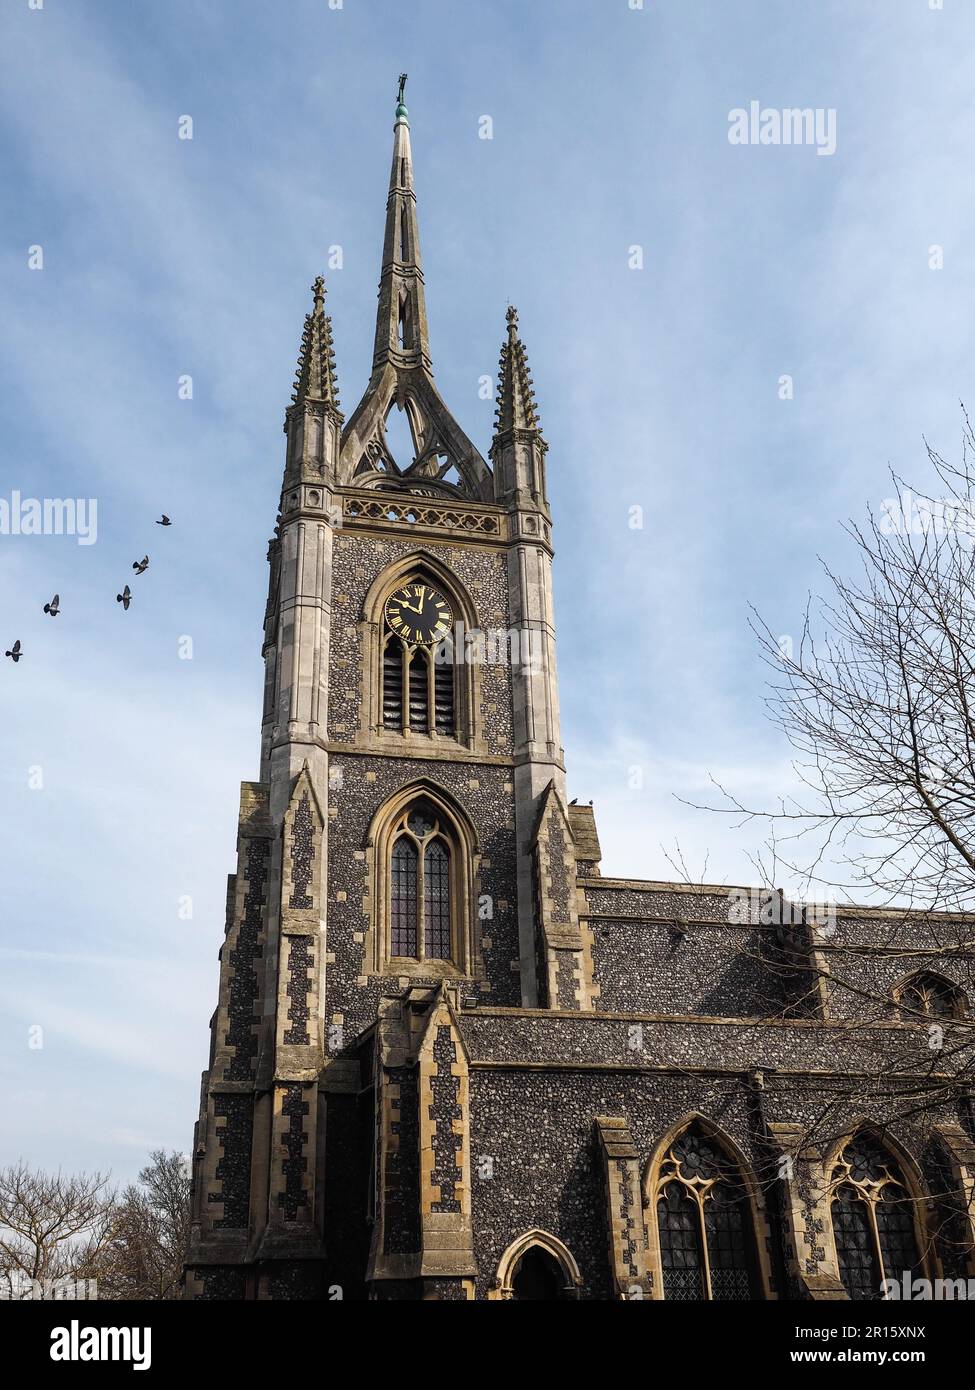 FAVERSHAM, KENT/UK - MARCH 29 : View of St Mary of Charity Church in Faversham Kent on March 29, 2014 Stock Photo